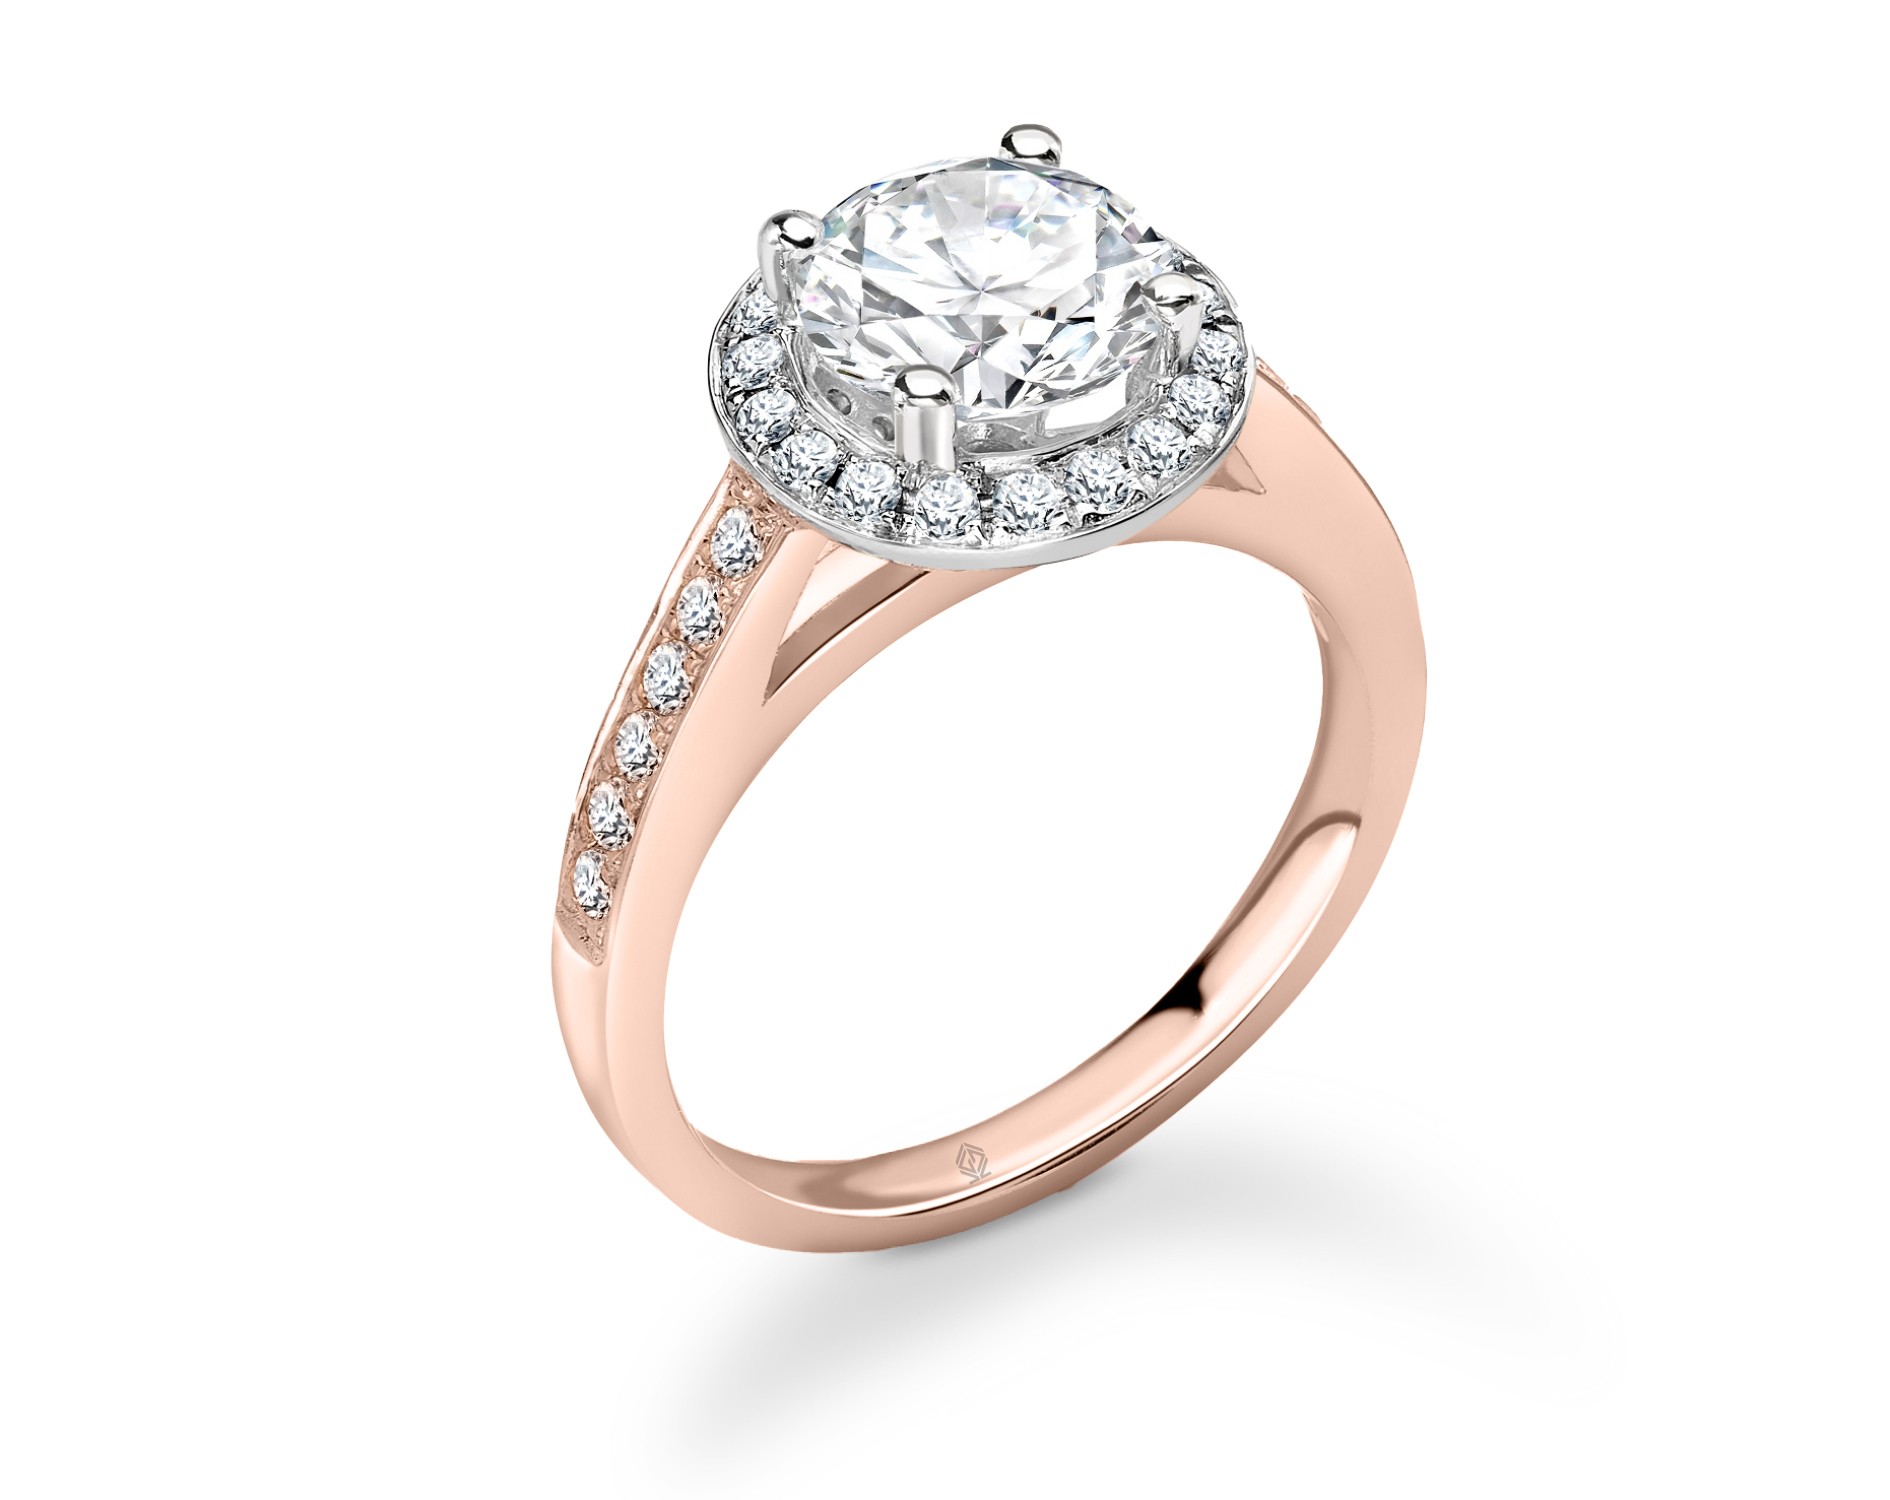 DUAL-TONE ROUND CUT HALO DIAMOND RING WITH SIDE STONES CHANNEL SET